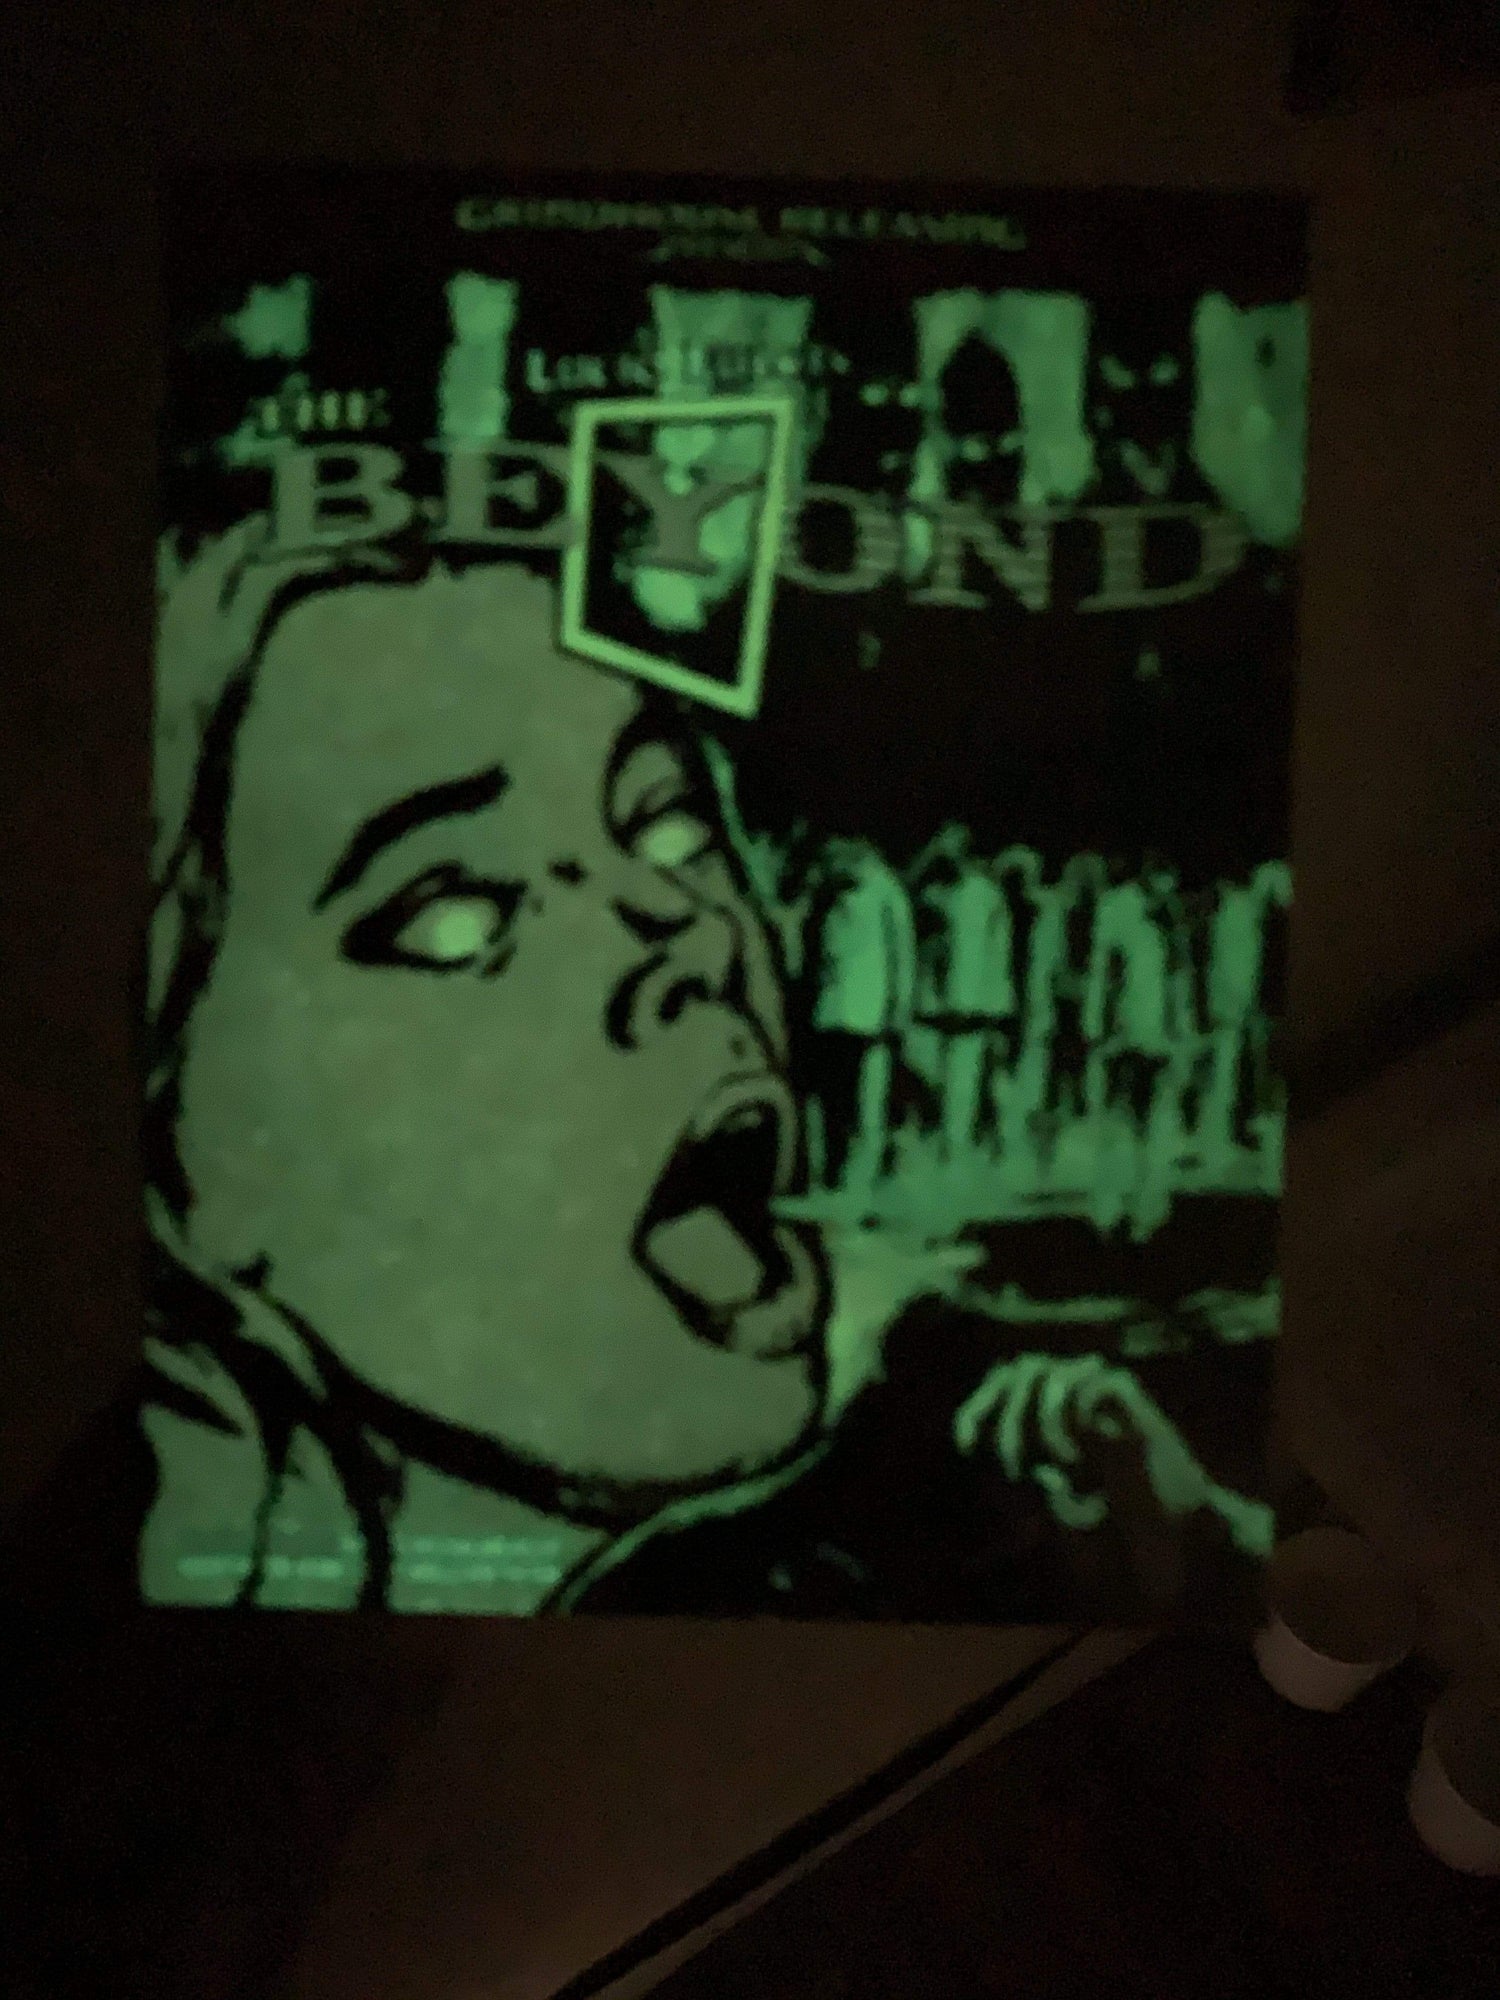 THE BEYOND (1981) 3 disc (2 Blu-ray + CD soundtrack) set: GLOW IN THE DARK embossed slipcover